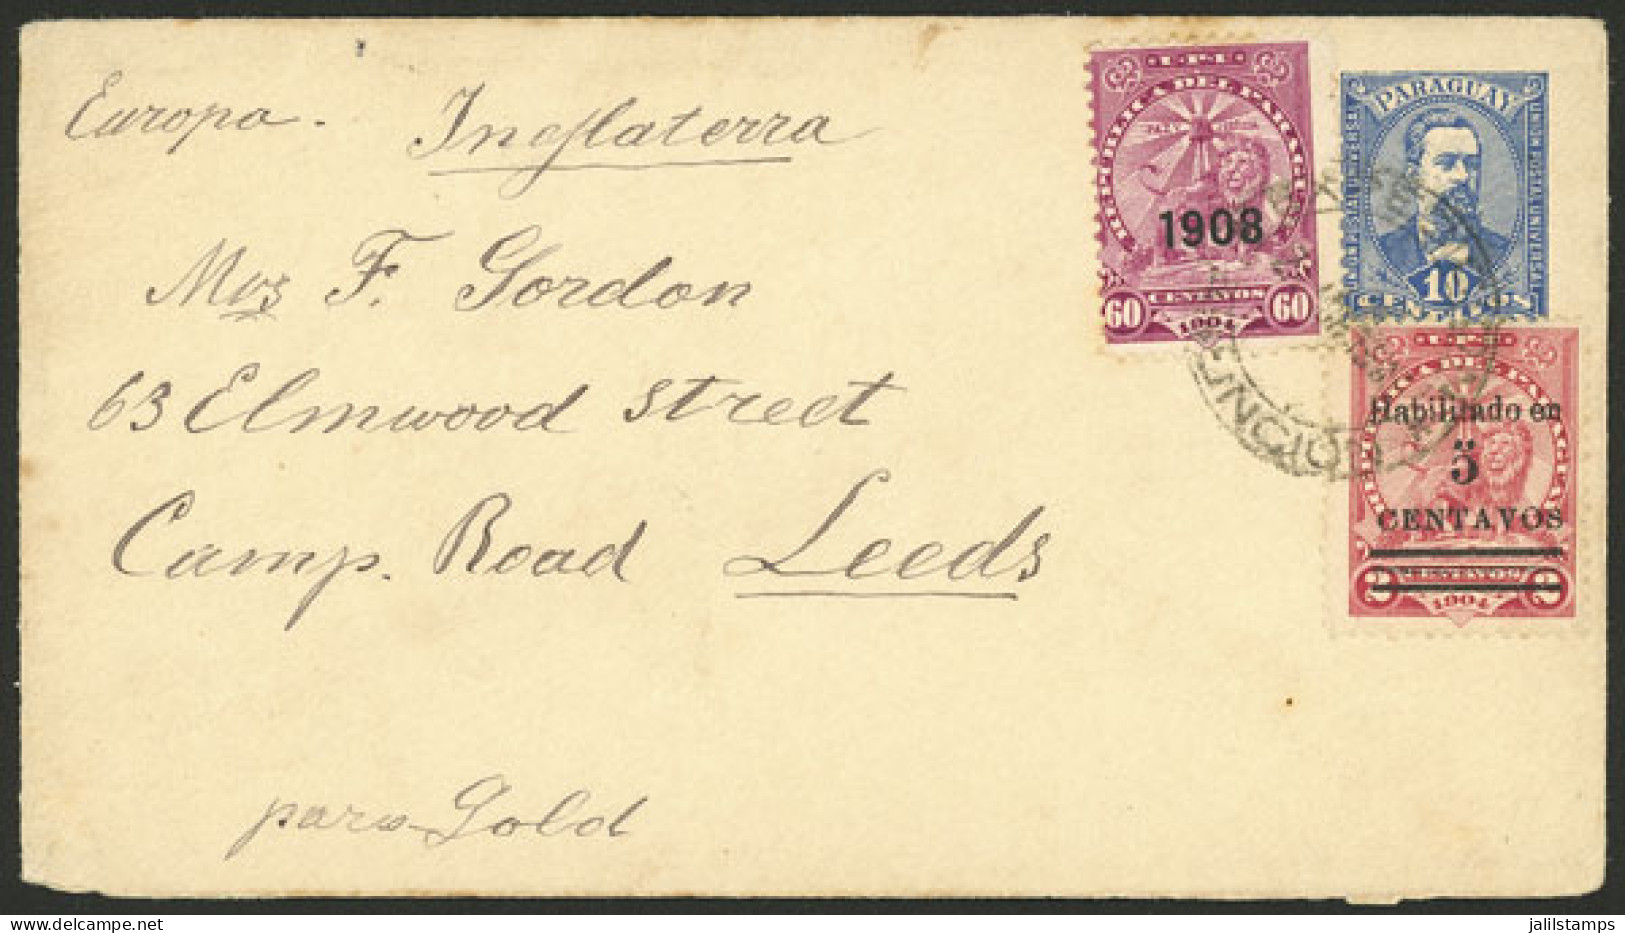 PARAGUAY: 21/AP/1909 Asunción - England, 10c. Stationery Envelope + Additional 65c., With Arrival Backstamp Of Leeds 20/ - Paraguay